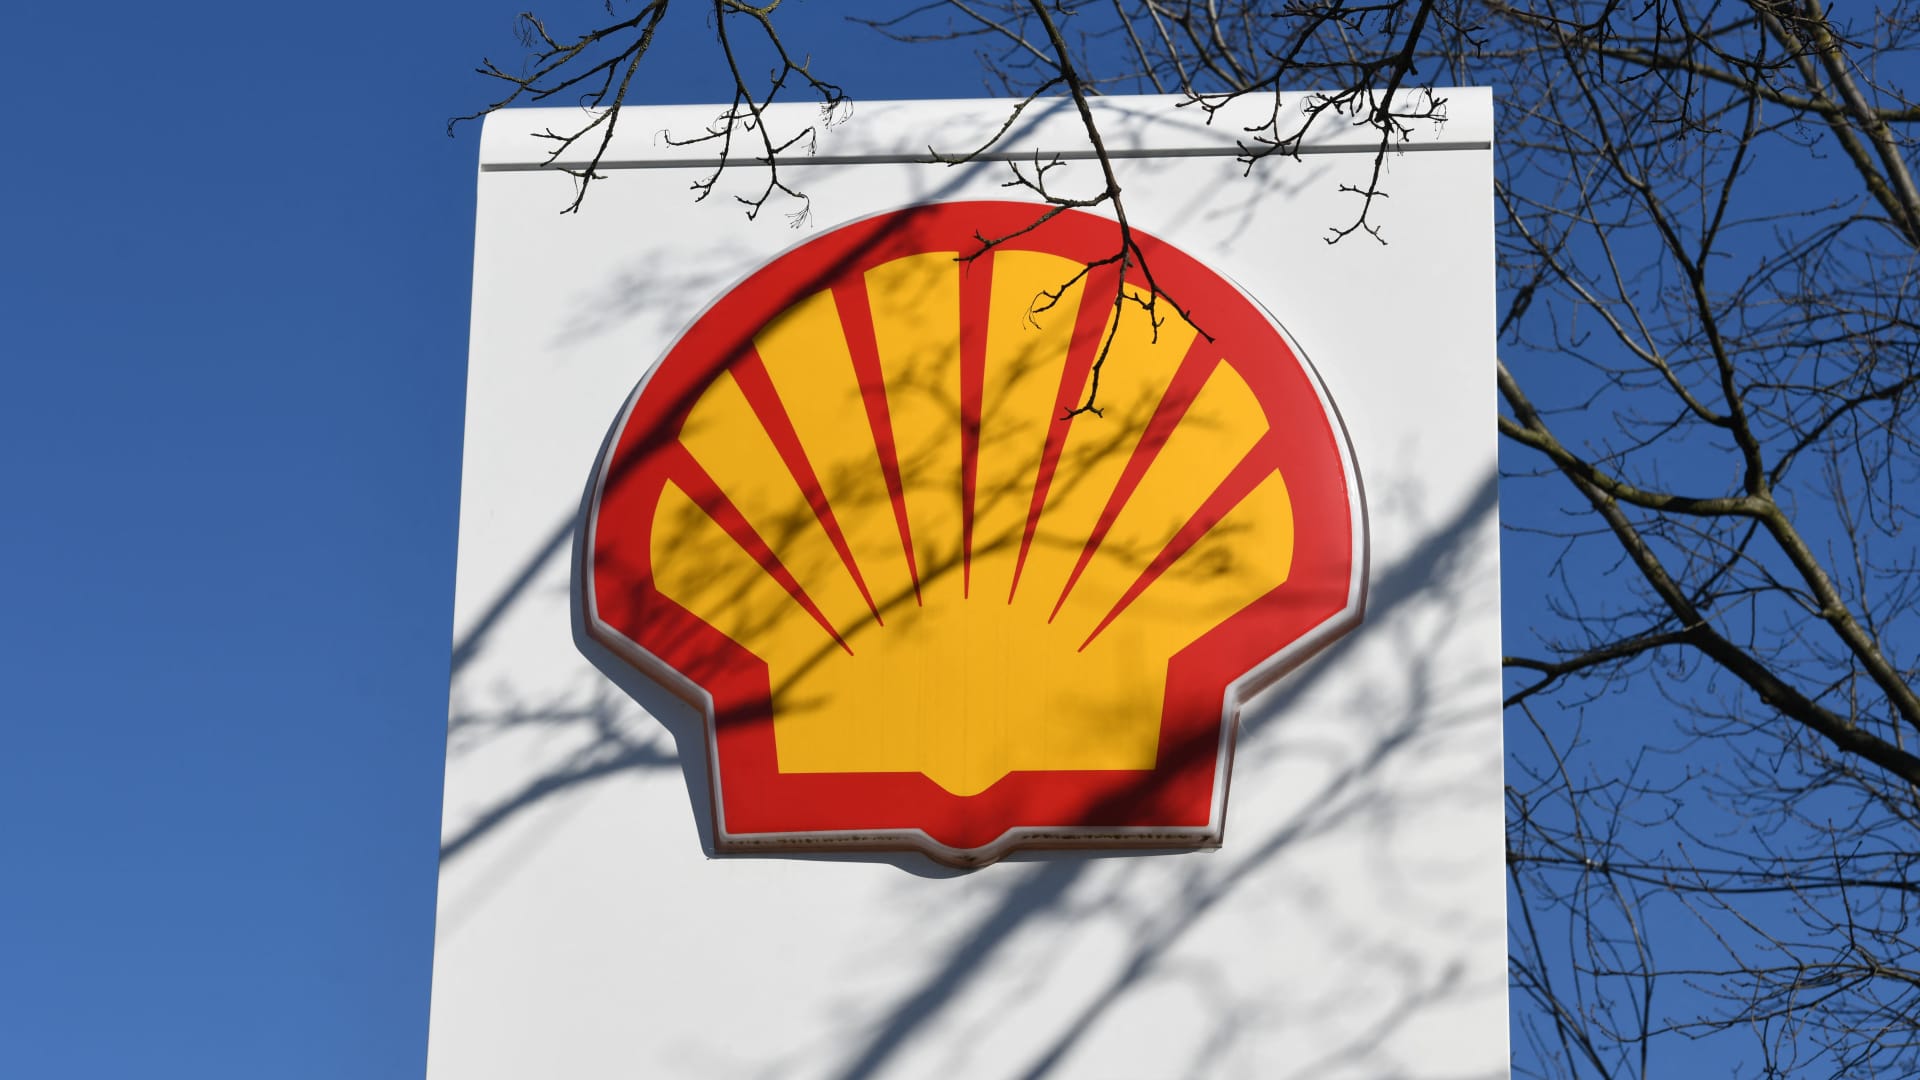 Shell to build ‘Europe’s largest renewable hydrogen plant’